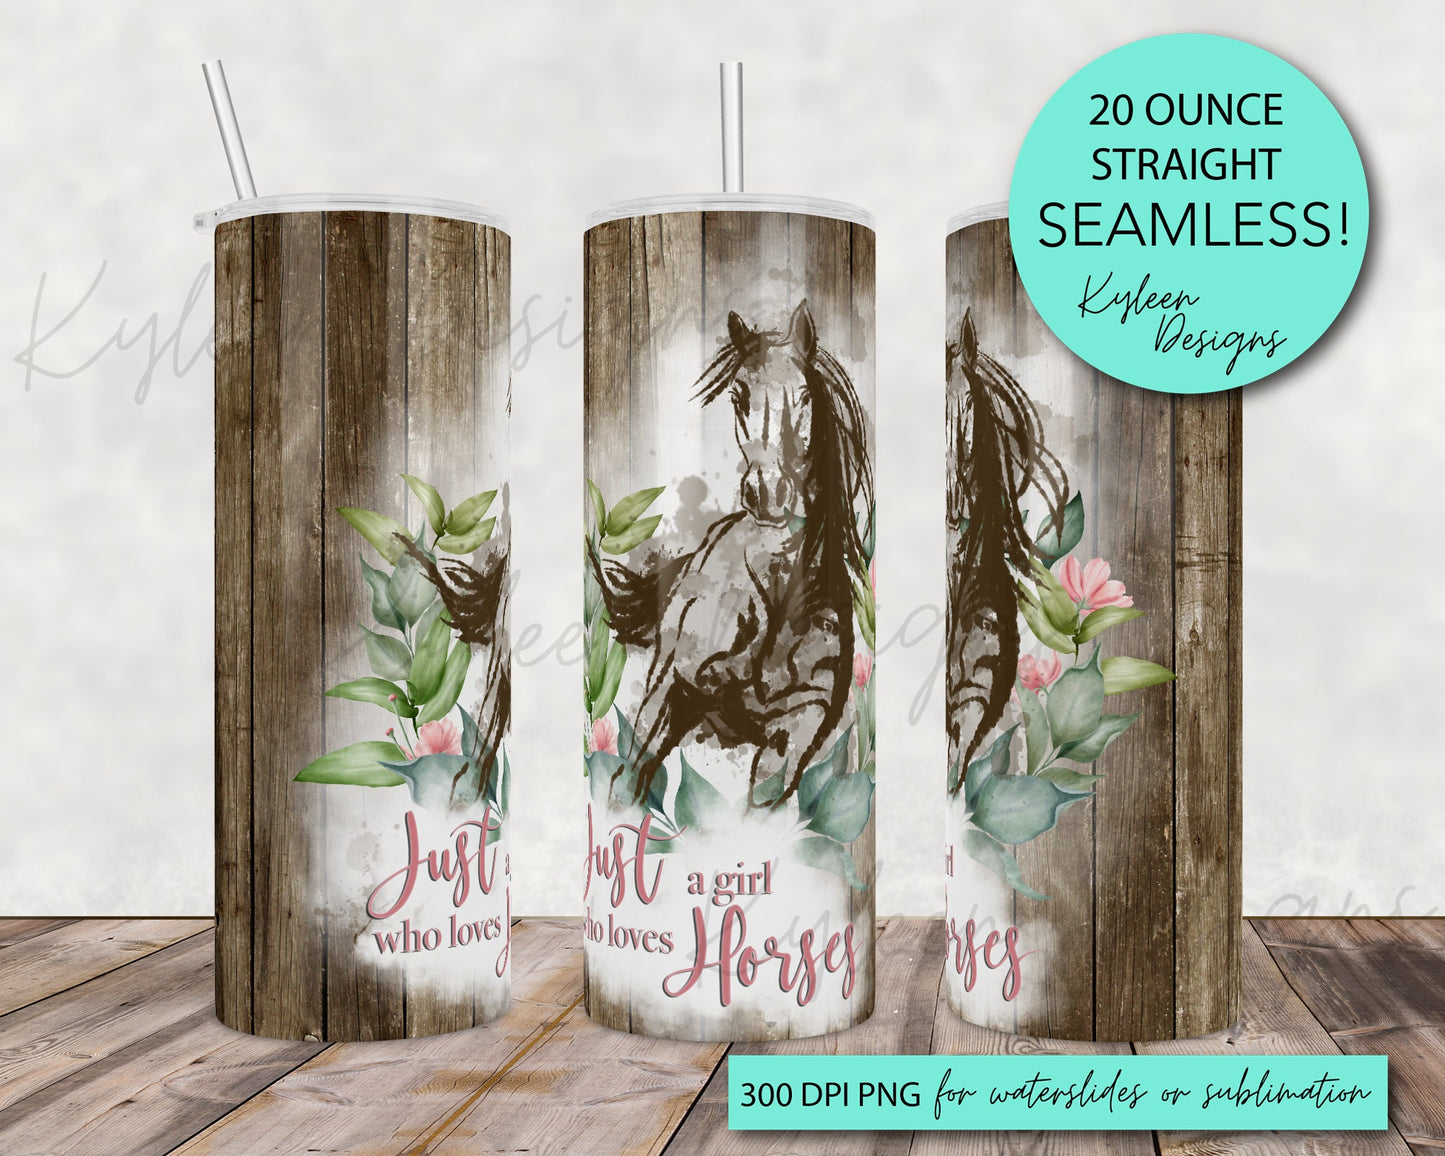 SEAMLESS 20 ounce straight just a girl who loves horses wrap for sublimation, waterslide High res PNG digital file- Straight only